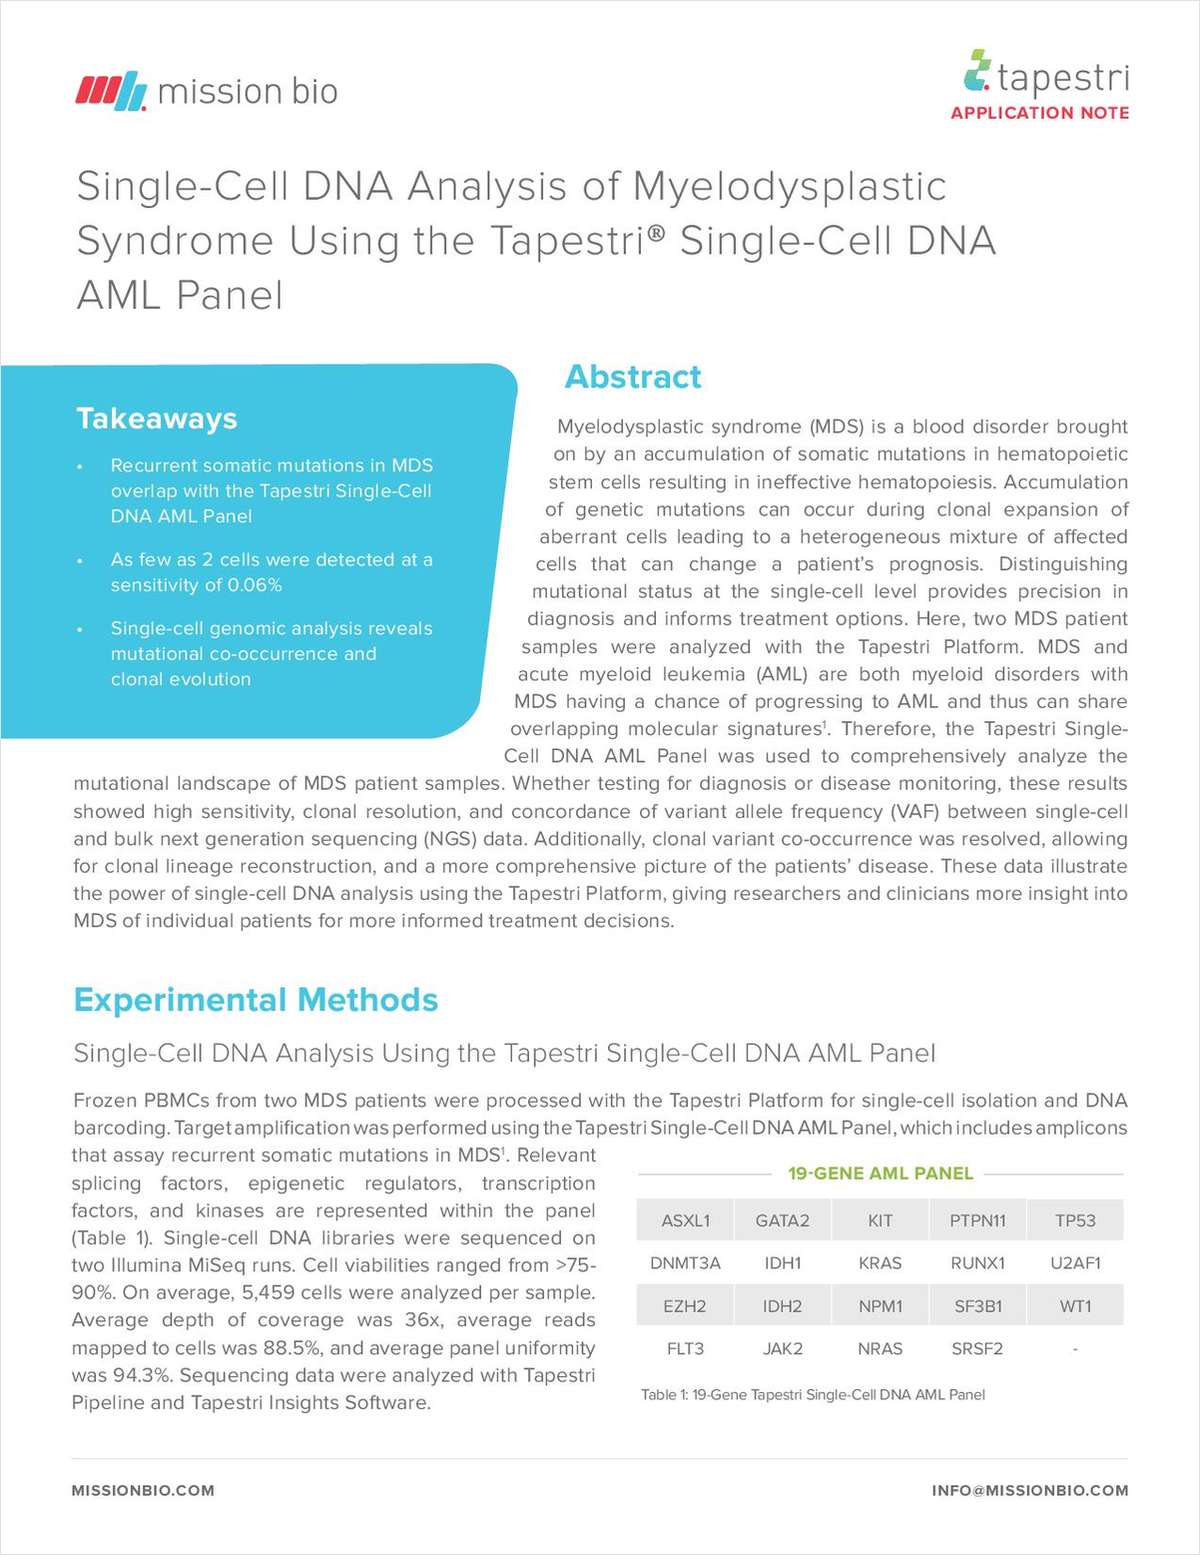 Single-Cell DNA Analysis of Myelodysplastic Syndrome Using the Tapestri Single-Cell DNA AML Panel